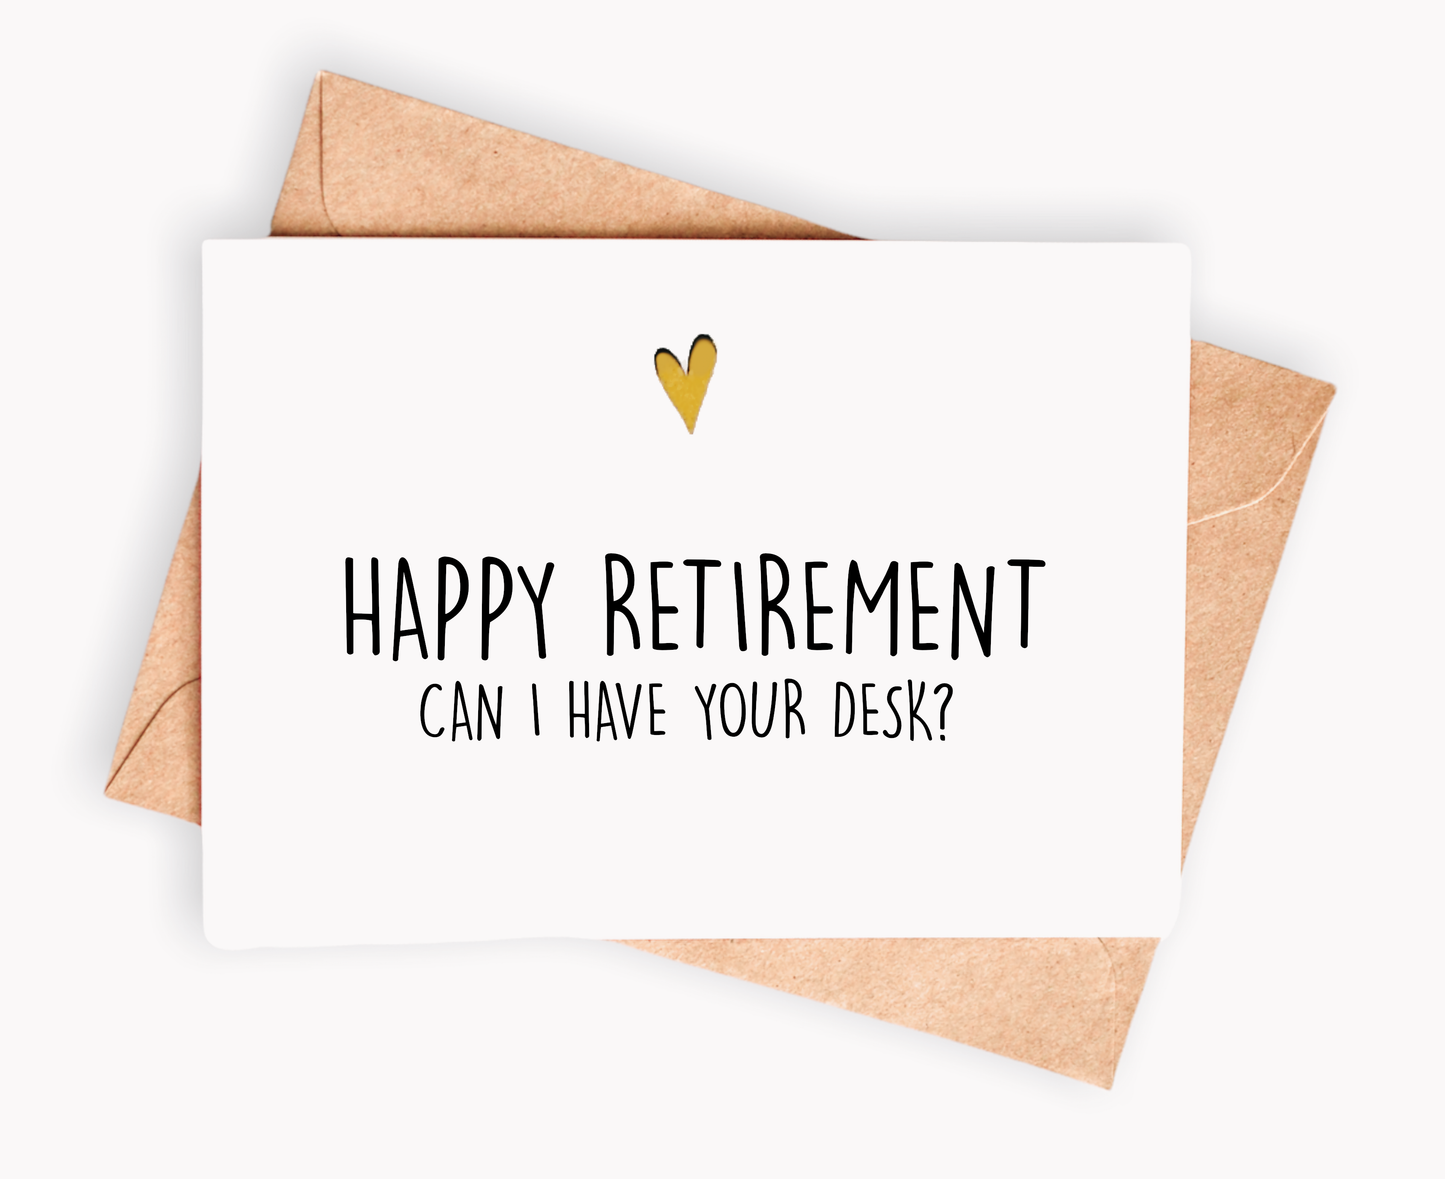 Retirement card - Can I have you desk?